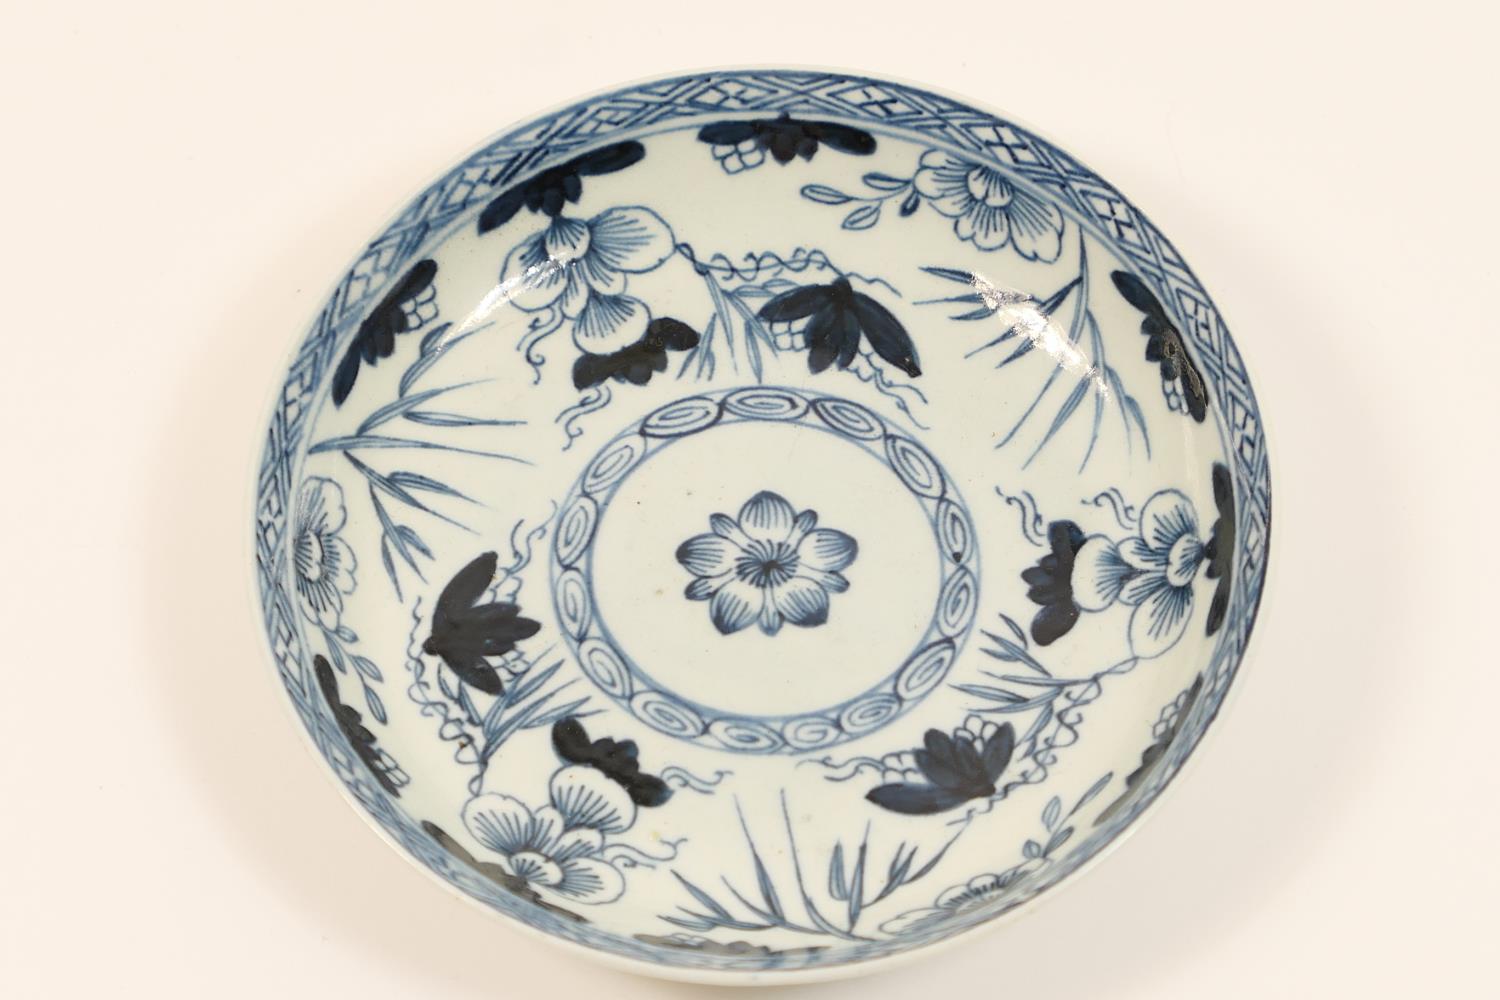 Chaffers Liverpool blue and white porcelain saucer, circa 1756-65, decorated with a formalised